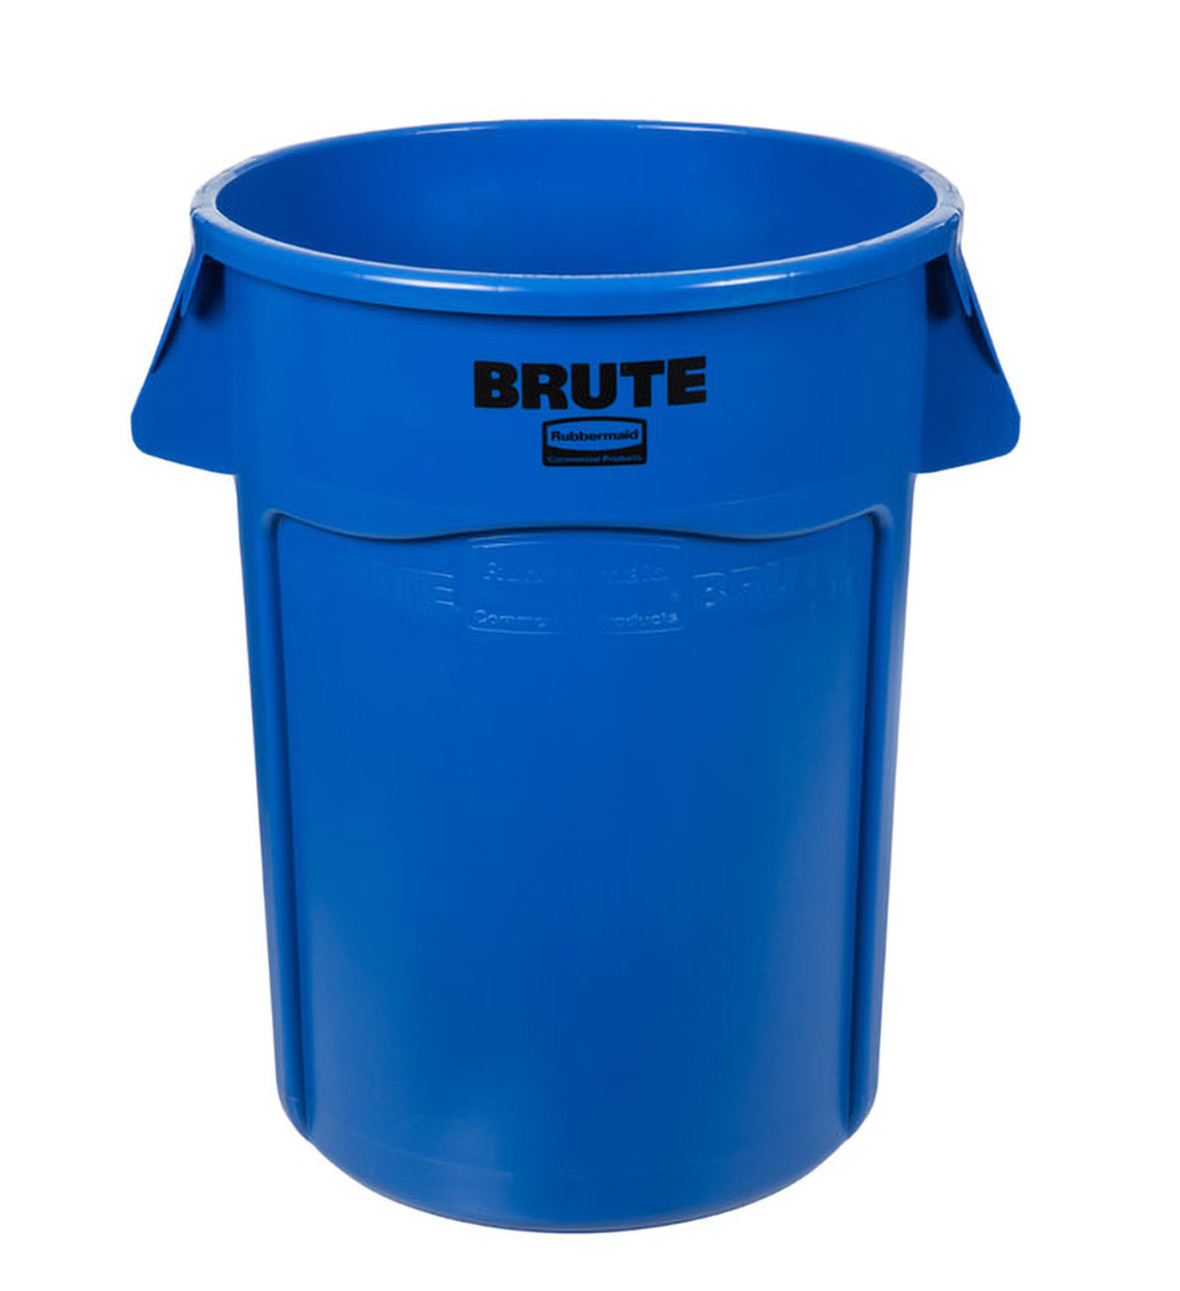 Rubbermaid Commercial Prod. Brute Vented Trash Receptacle, Blue, Round